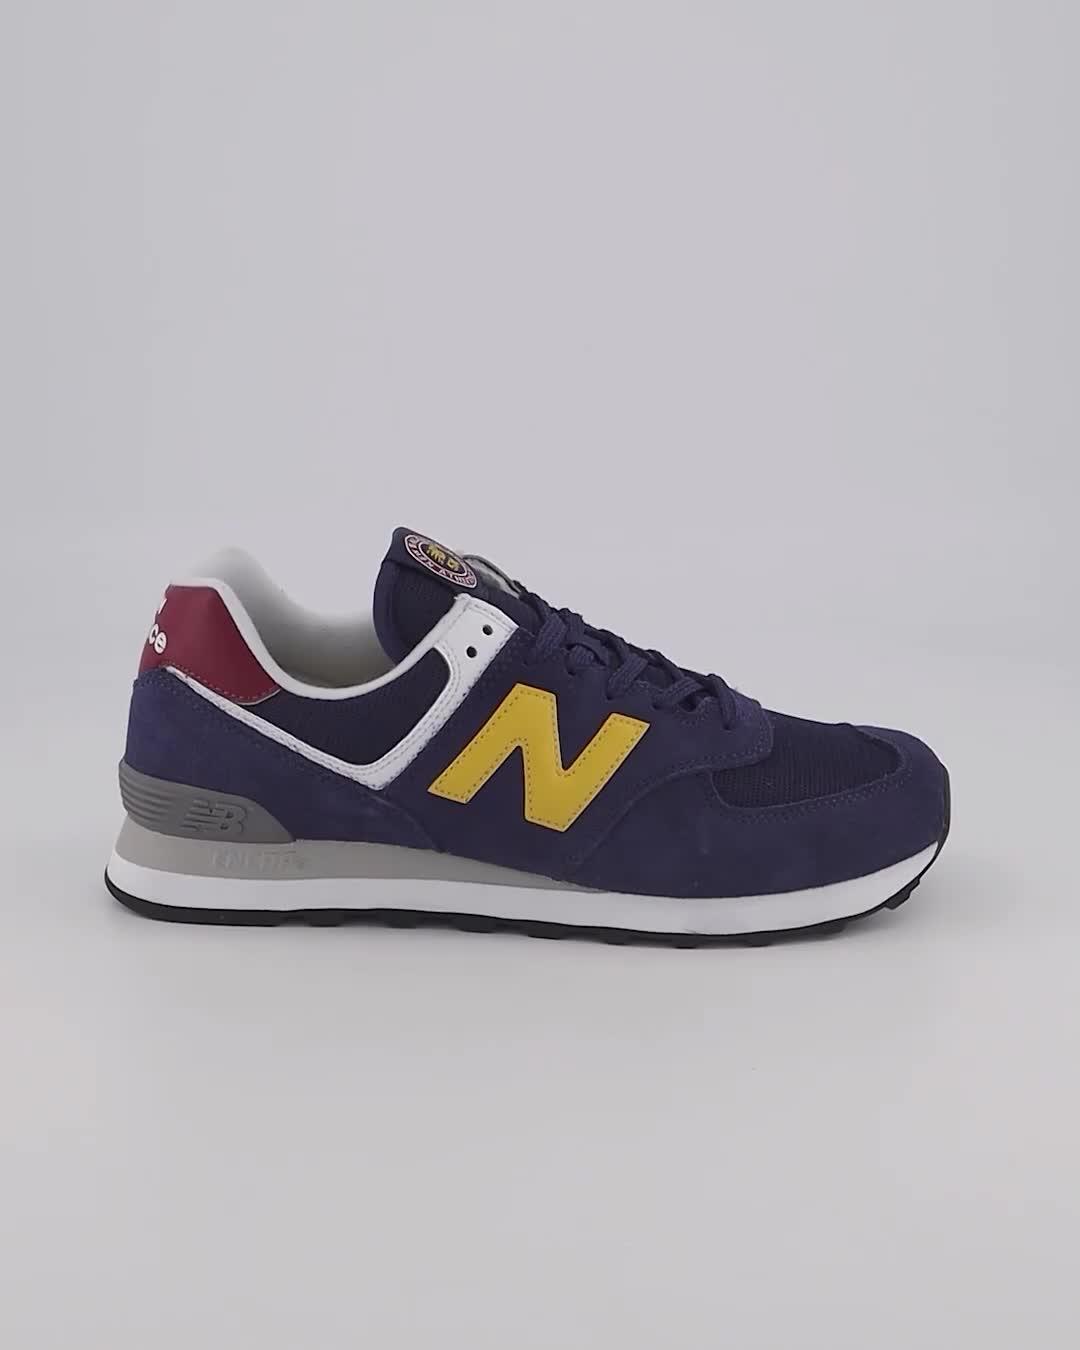 New Balance 574 Navy Blue And Yellow | vlr.eng.br